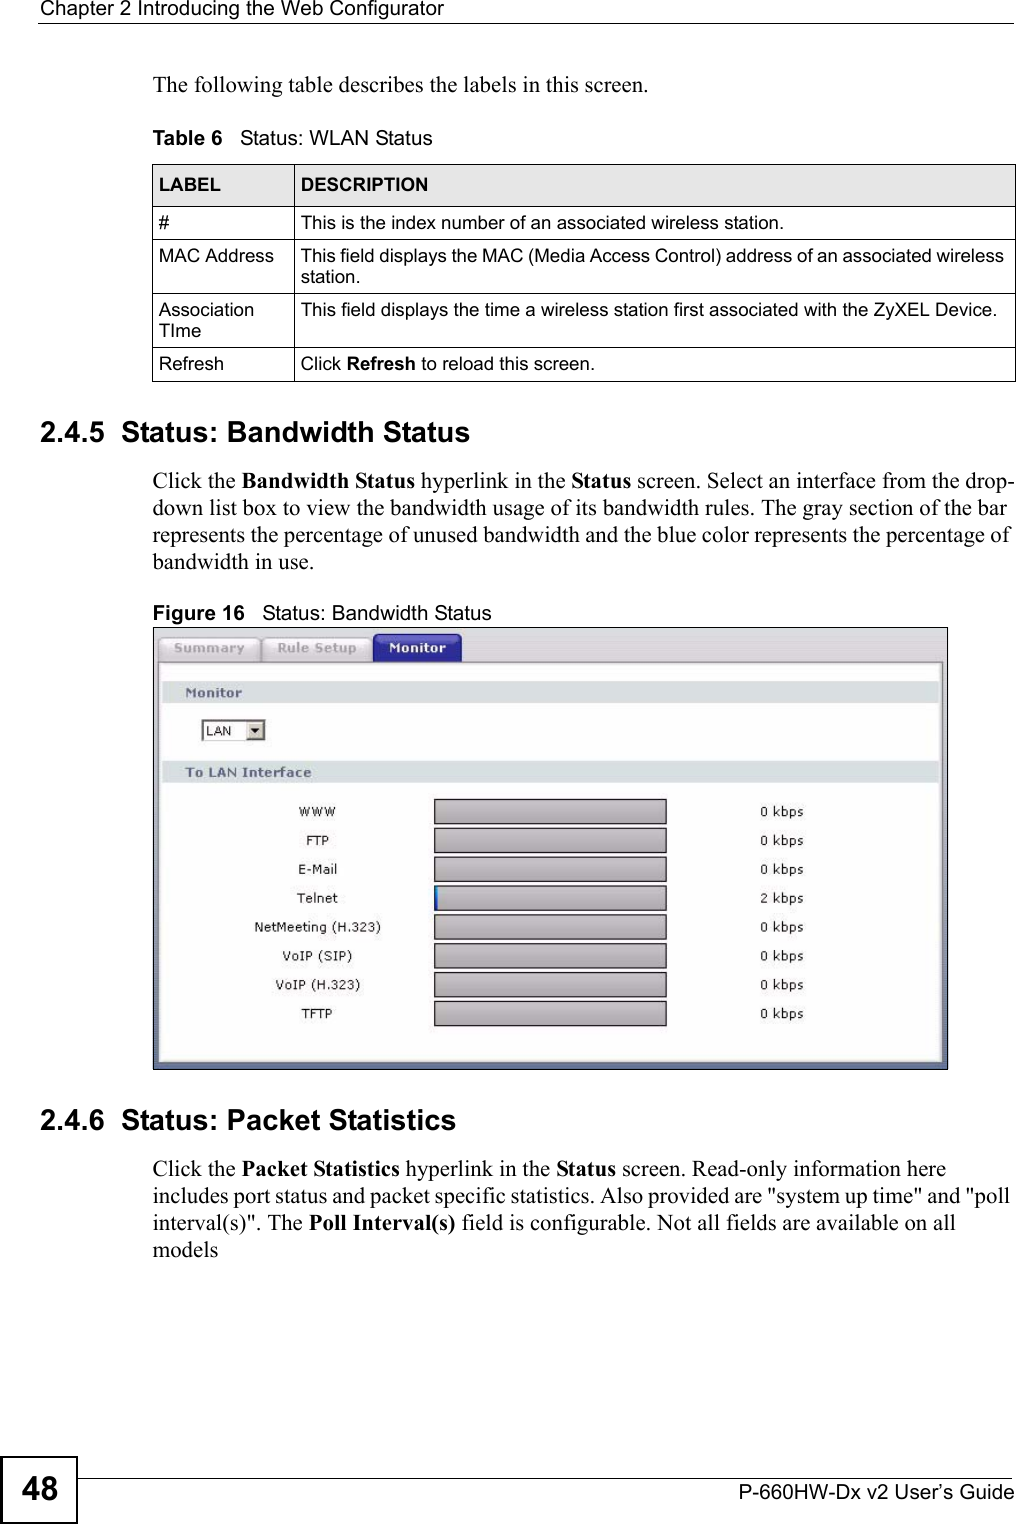 Chapter 2 Introducing the Web ConfiguratorP-660HW-Dx v2 User’s Guide48The following table describes the labels in this screen.2.4.5  Status: Bandwidth StatusClick the Bandwidth Status hyperlink in the Status screen. Select an interface from the drop-down list box to view the bandwidth usage of its bandwidth rules. The gray section of the bar represents the percentage of unused bandwidth and the blue color represents the percentage of bandwidth in use.Figure 16   Status: Bandwidth Status2.4.6  Status: Packet StatisticsClick the Packet Statistics hyperlink in the Status screen. Read-only information here includes port status and packet specific statistics. Also provided are &quot;system up time&quot; and &quot;poll interval(s)&quot;. The Poll Interval(s) field is configurable. Not all fields are available on all modelsTable 6   Status: WLAN StatusLABEL  DESCRIPTION#  This is the index number of an associated wireless station. MAC Address This field displays the MAC (Media Access Control) address of an associated wireless station.Association TImeThis field displays the time a wireless station first associated with the ZyXEL Device.Refresh Click Refresh to reload this screen.